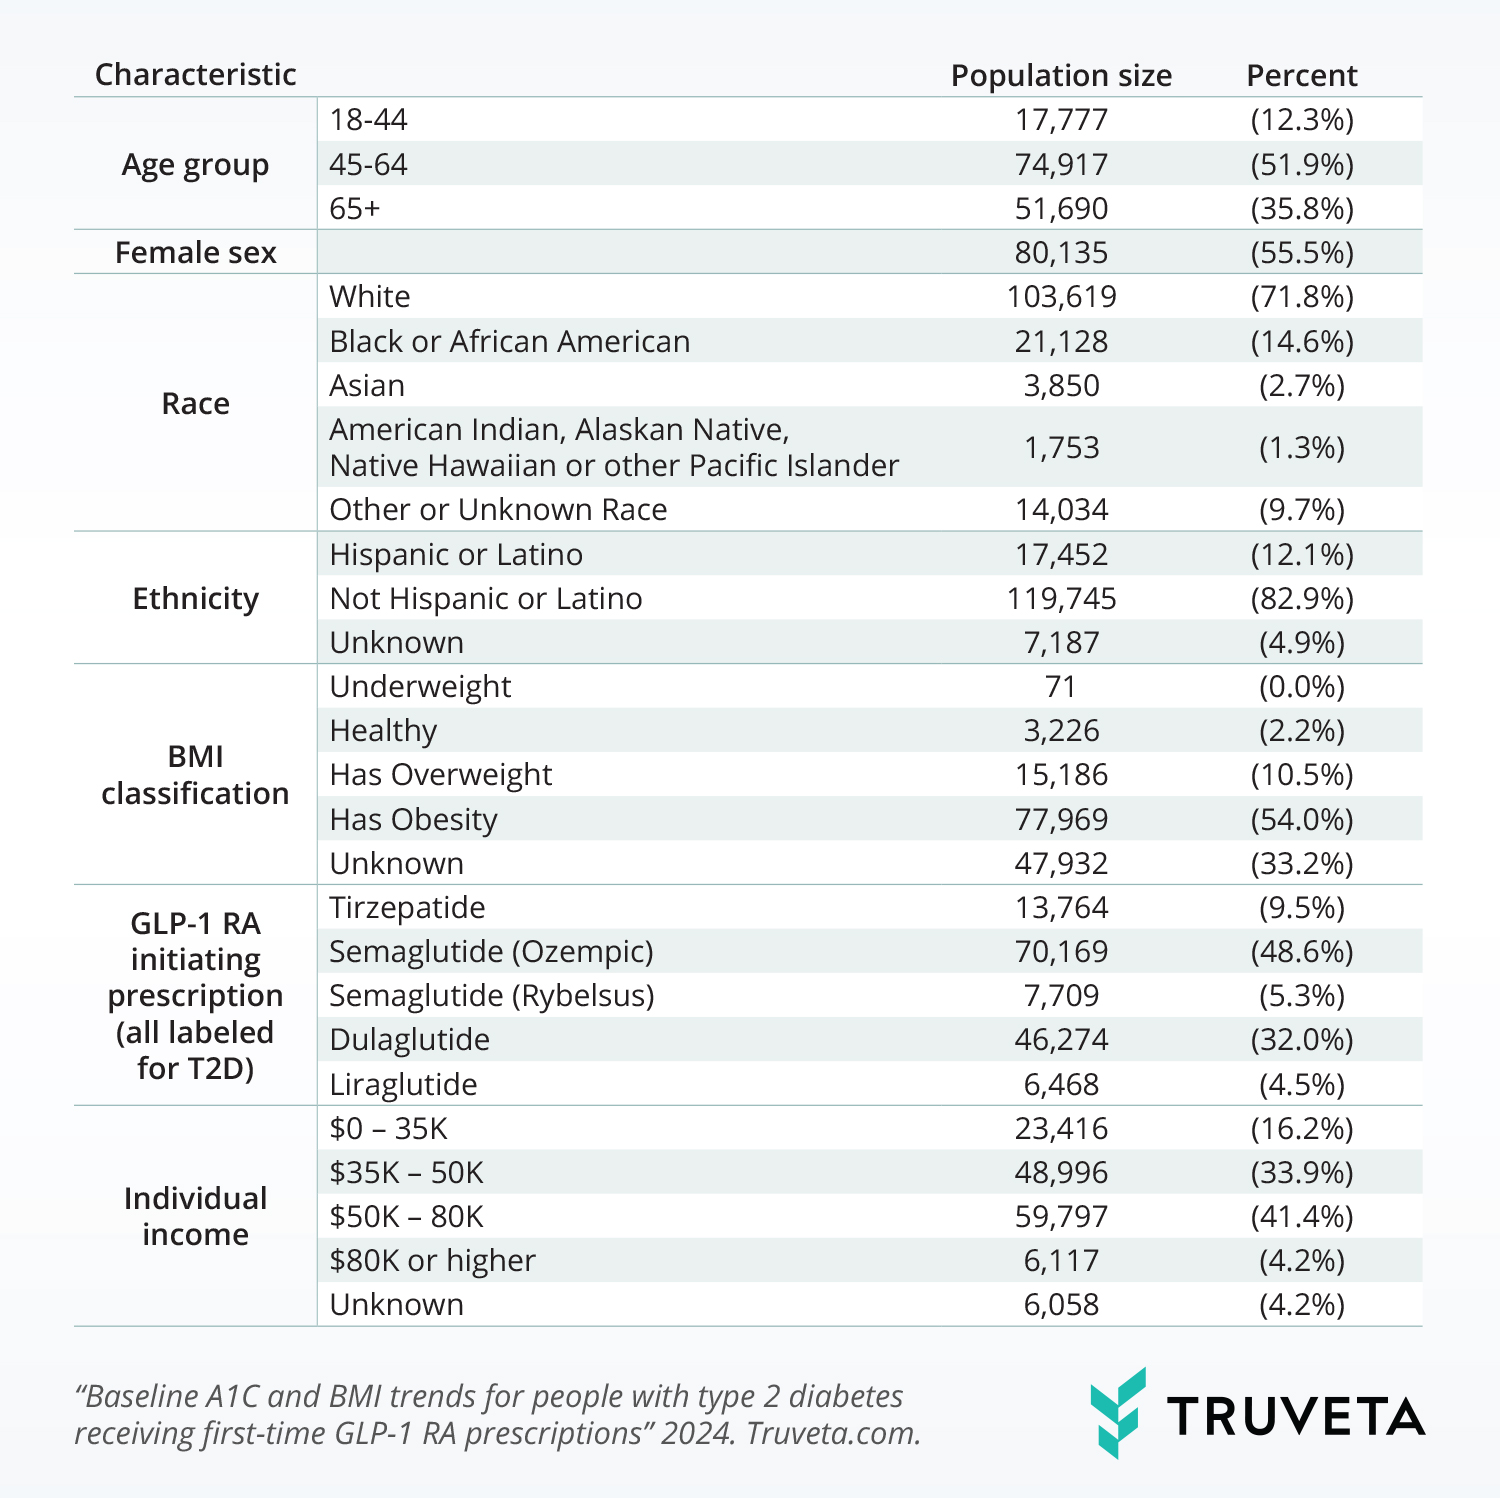 Truveta Research explores baseline A1C and BMI trends for people with type 2 diabetes receiving first-time GLP-1 RA prescriptions using de-identified EHR data.